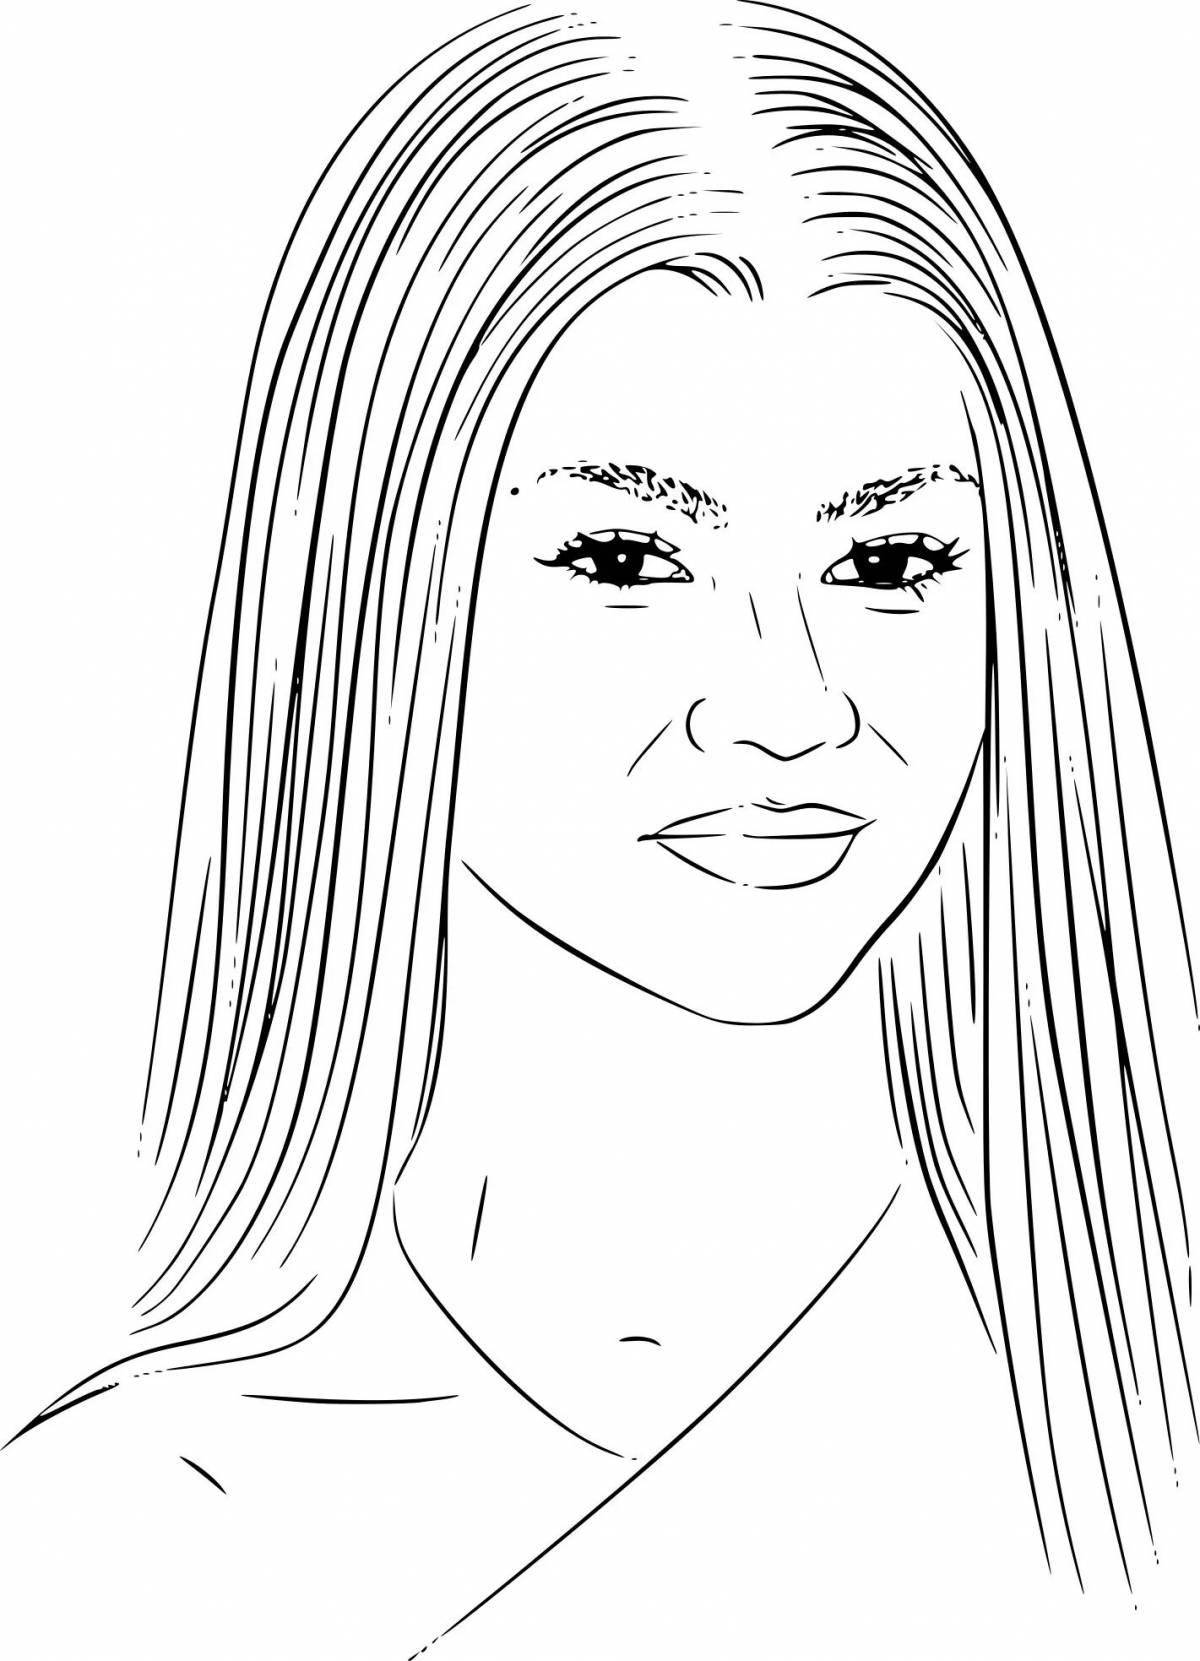 Fun celebrity coloring pages